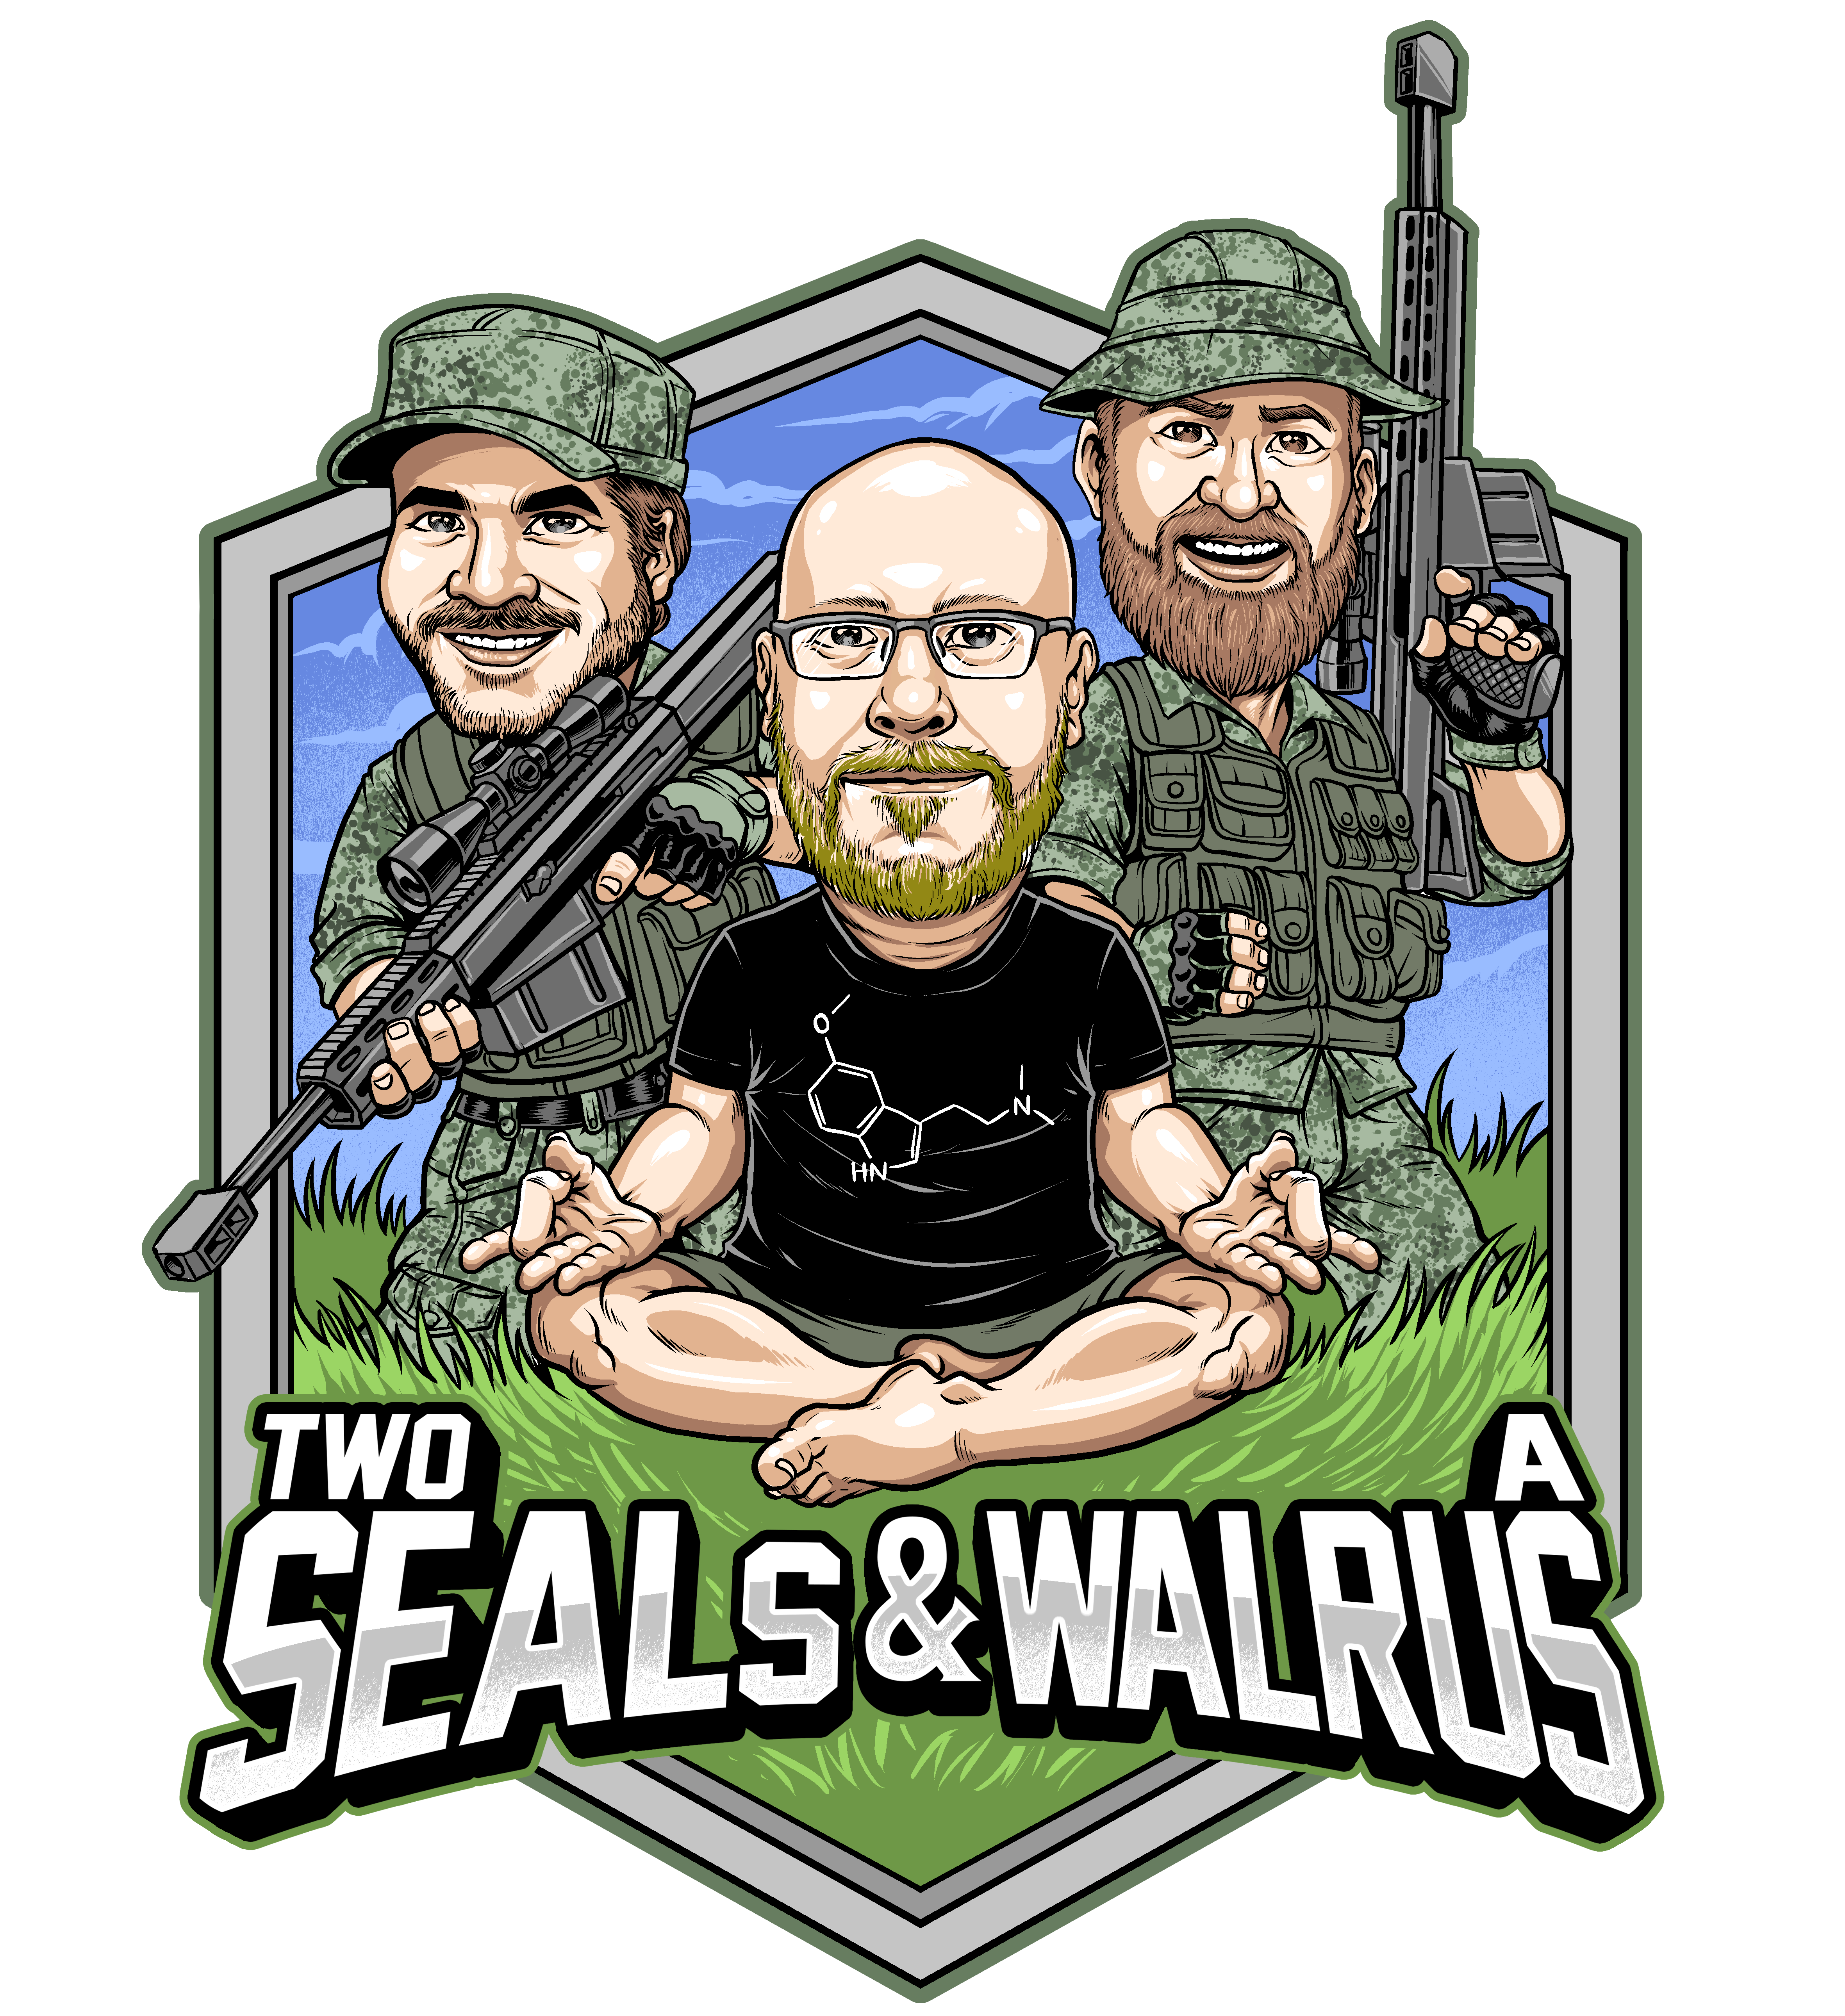 Two SEALs and a Walrus